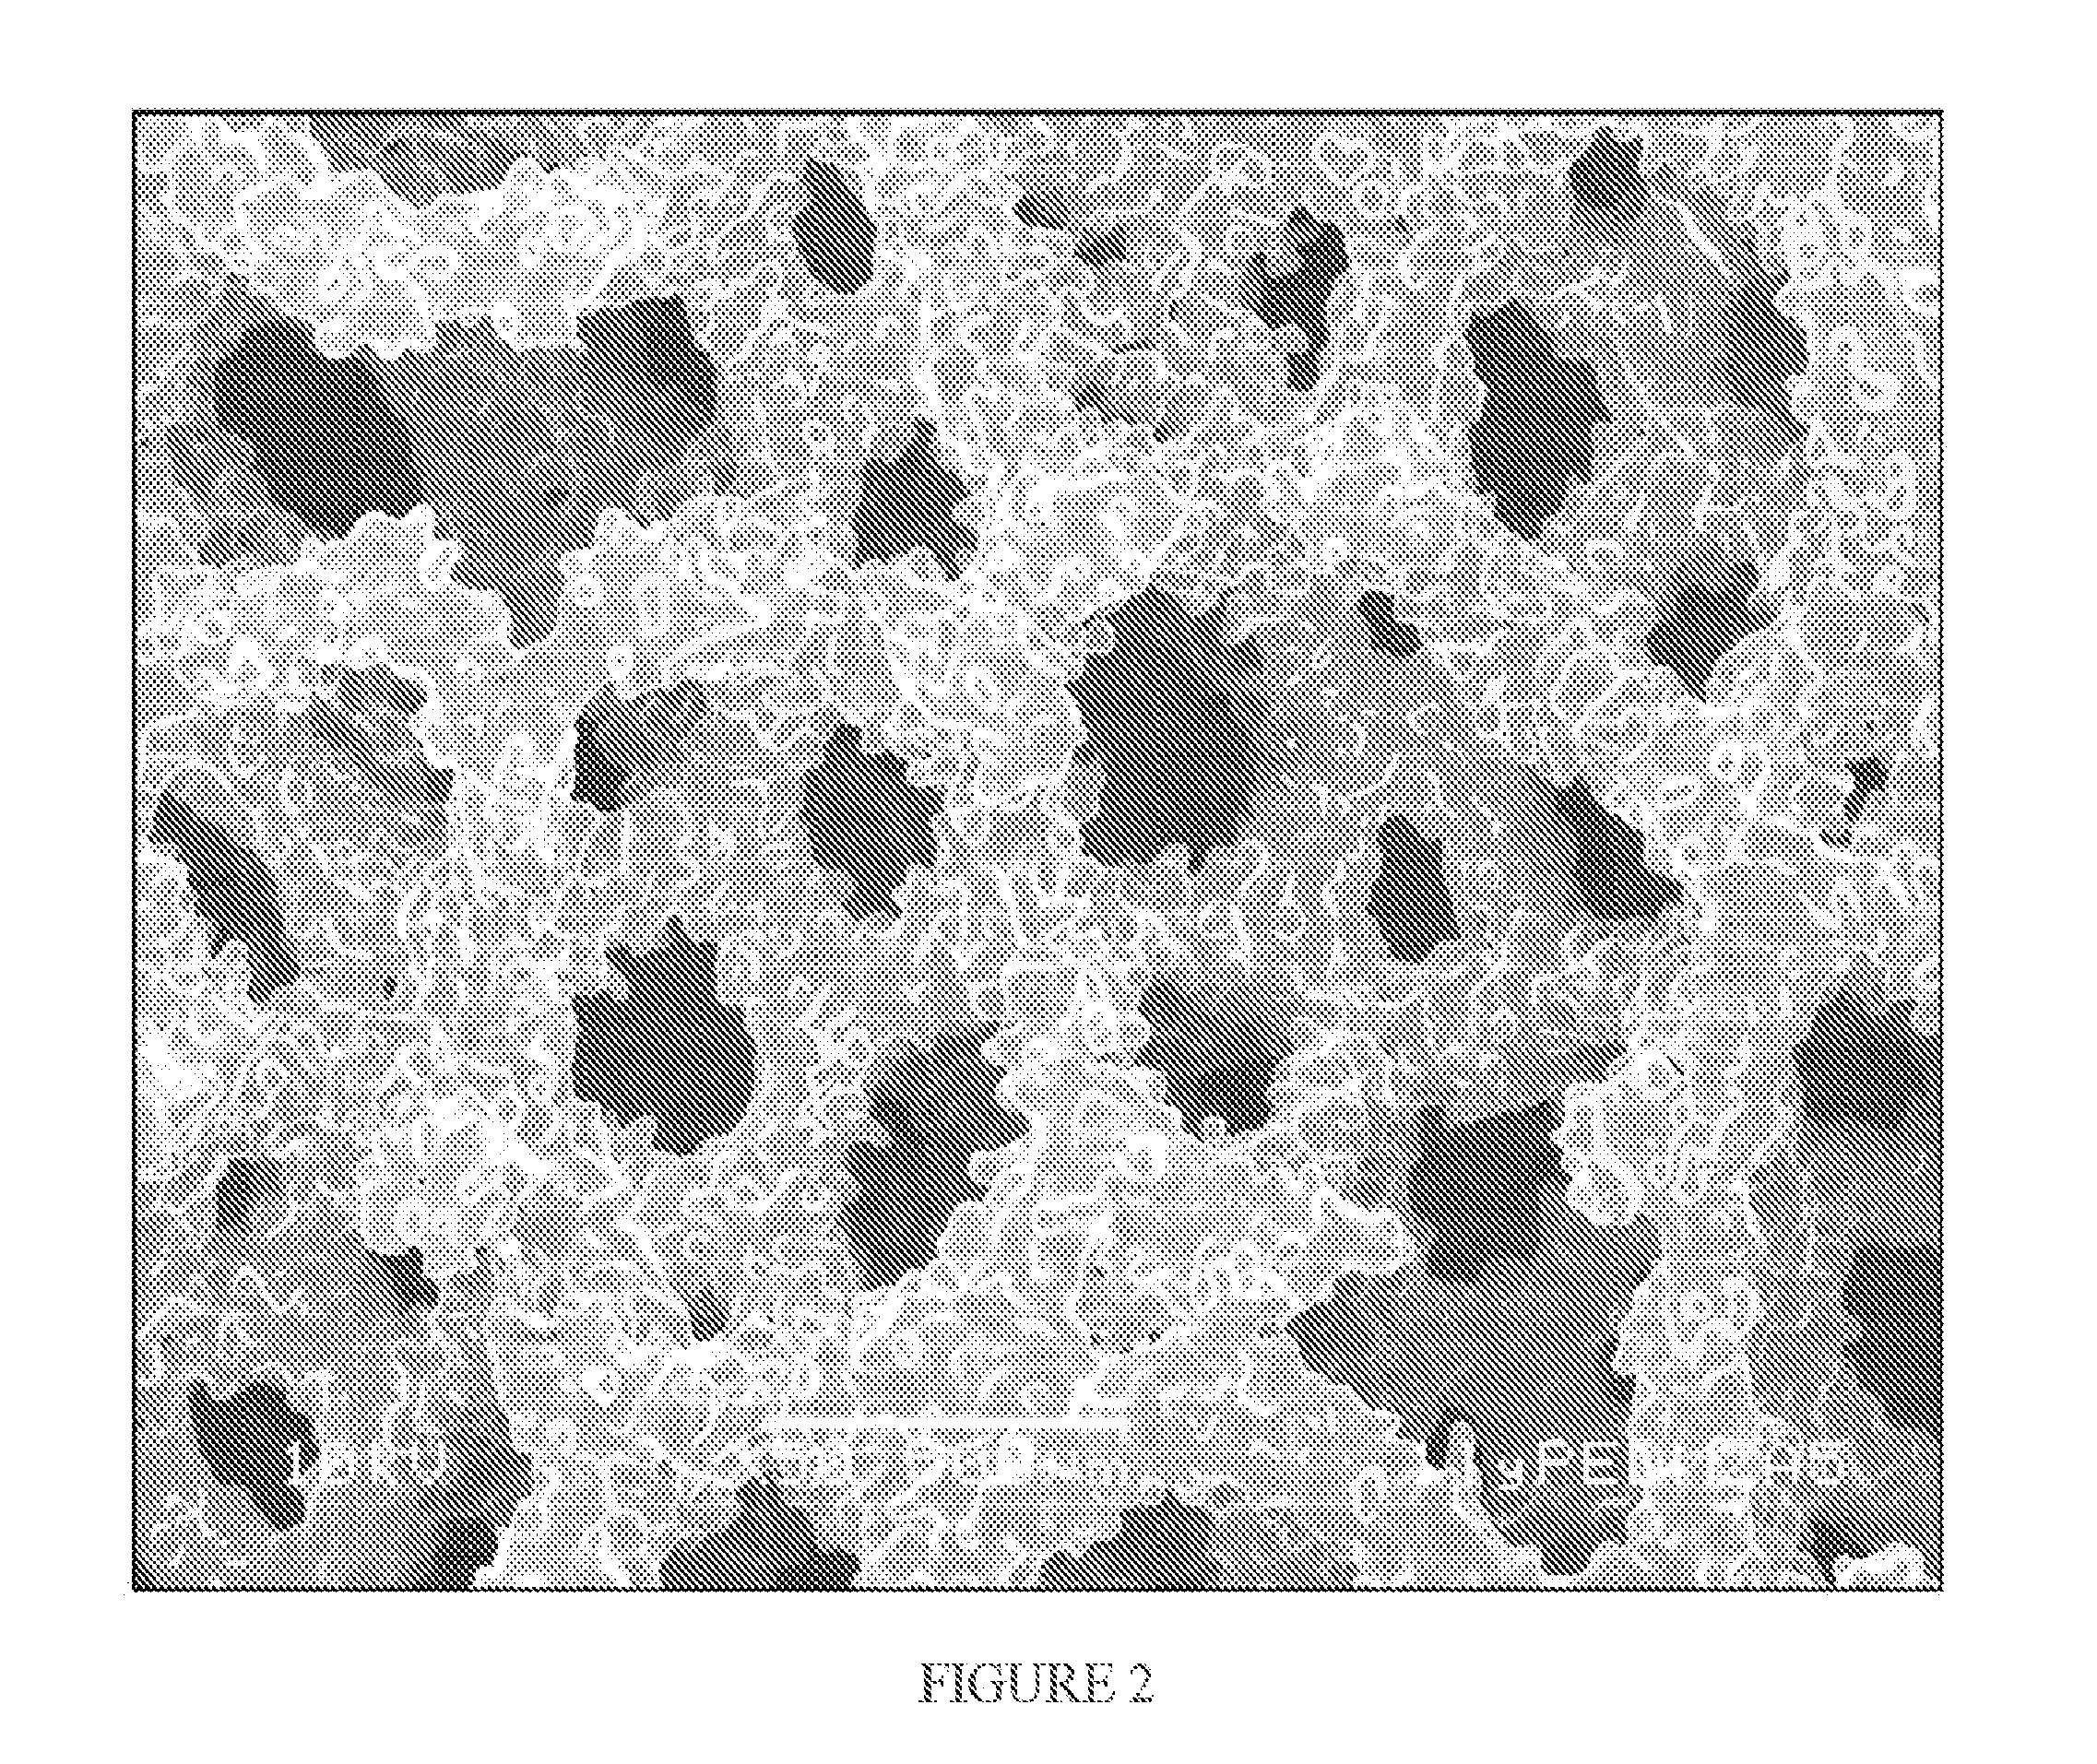 Porous surface layers with increased surface roughness and implants incorporating the same